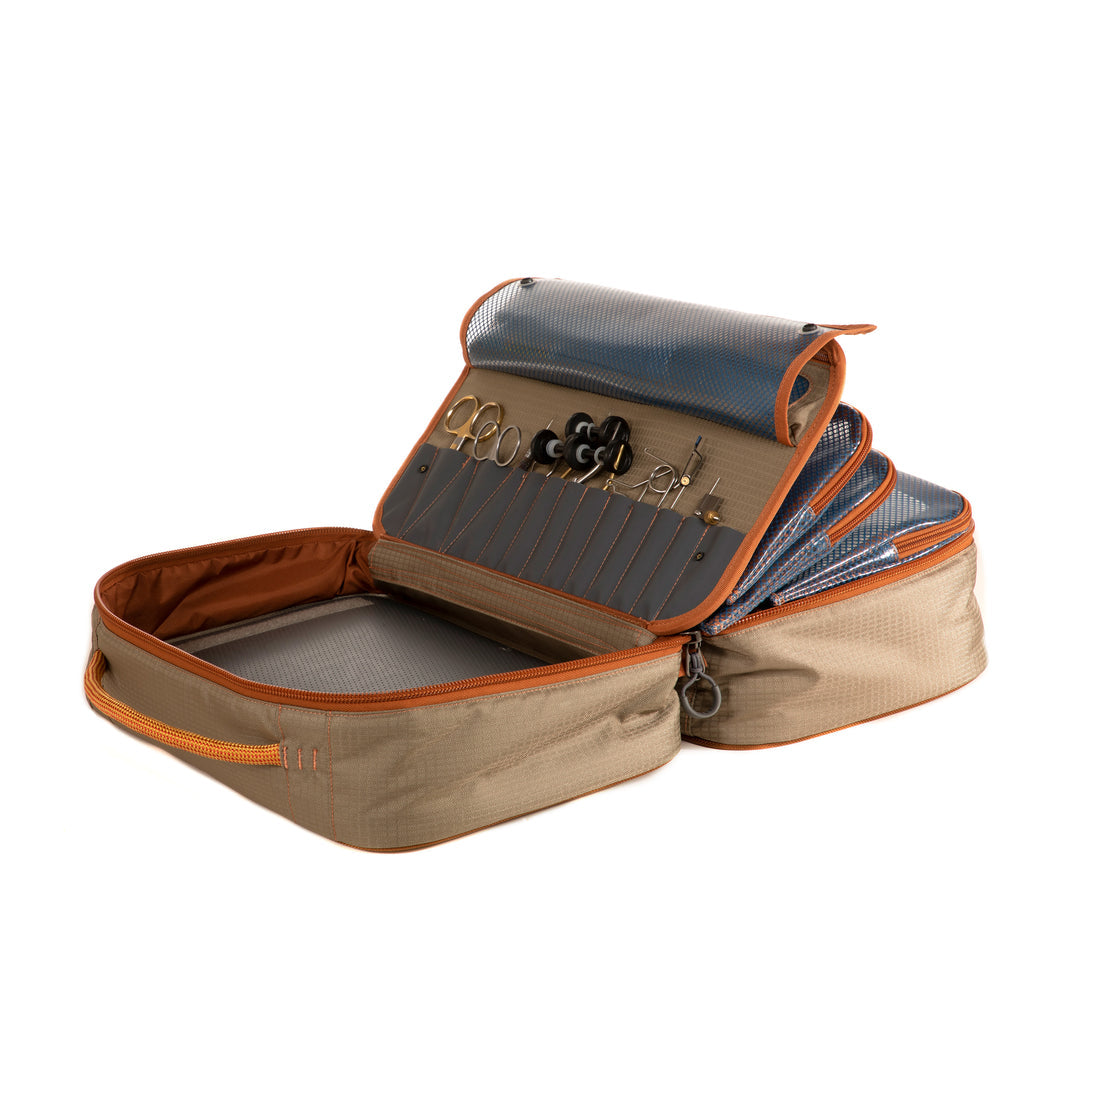 Orvis Dropper Rig Fly Box – Out Fly Fishing